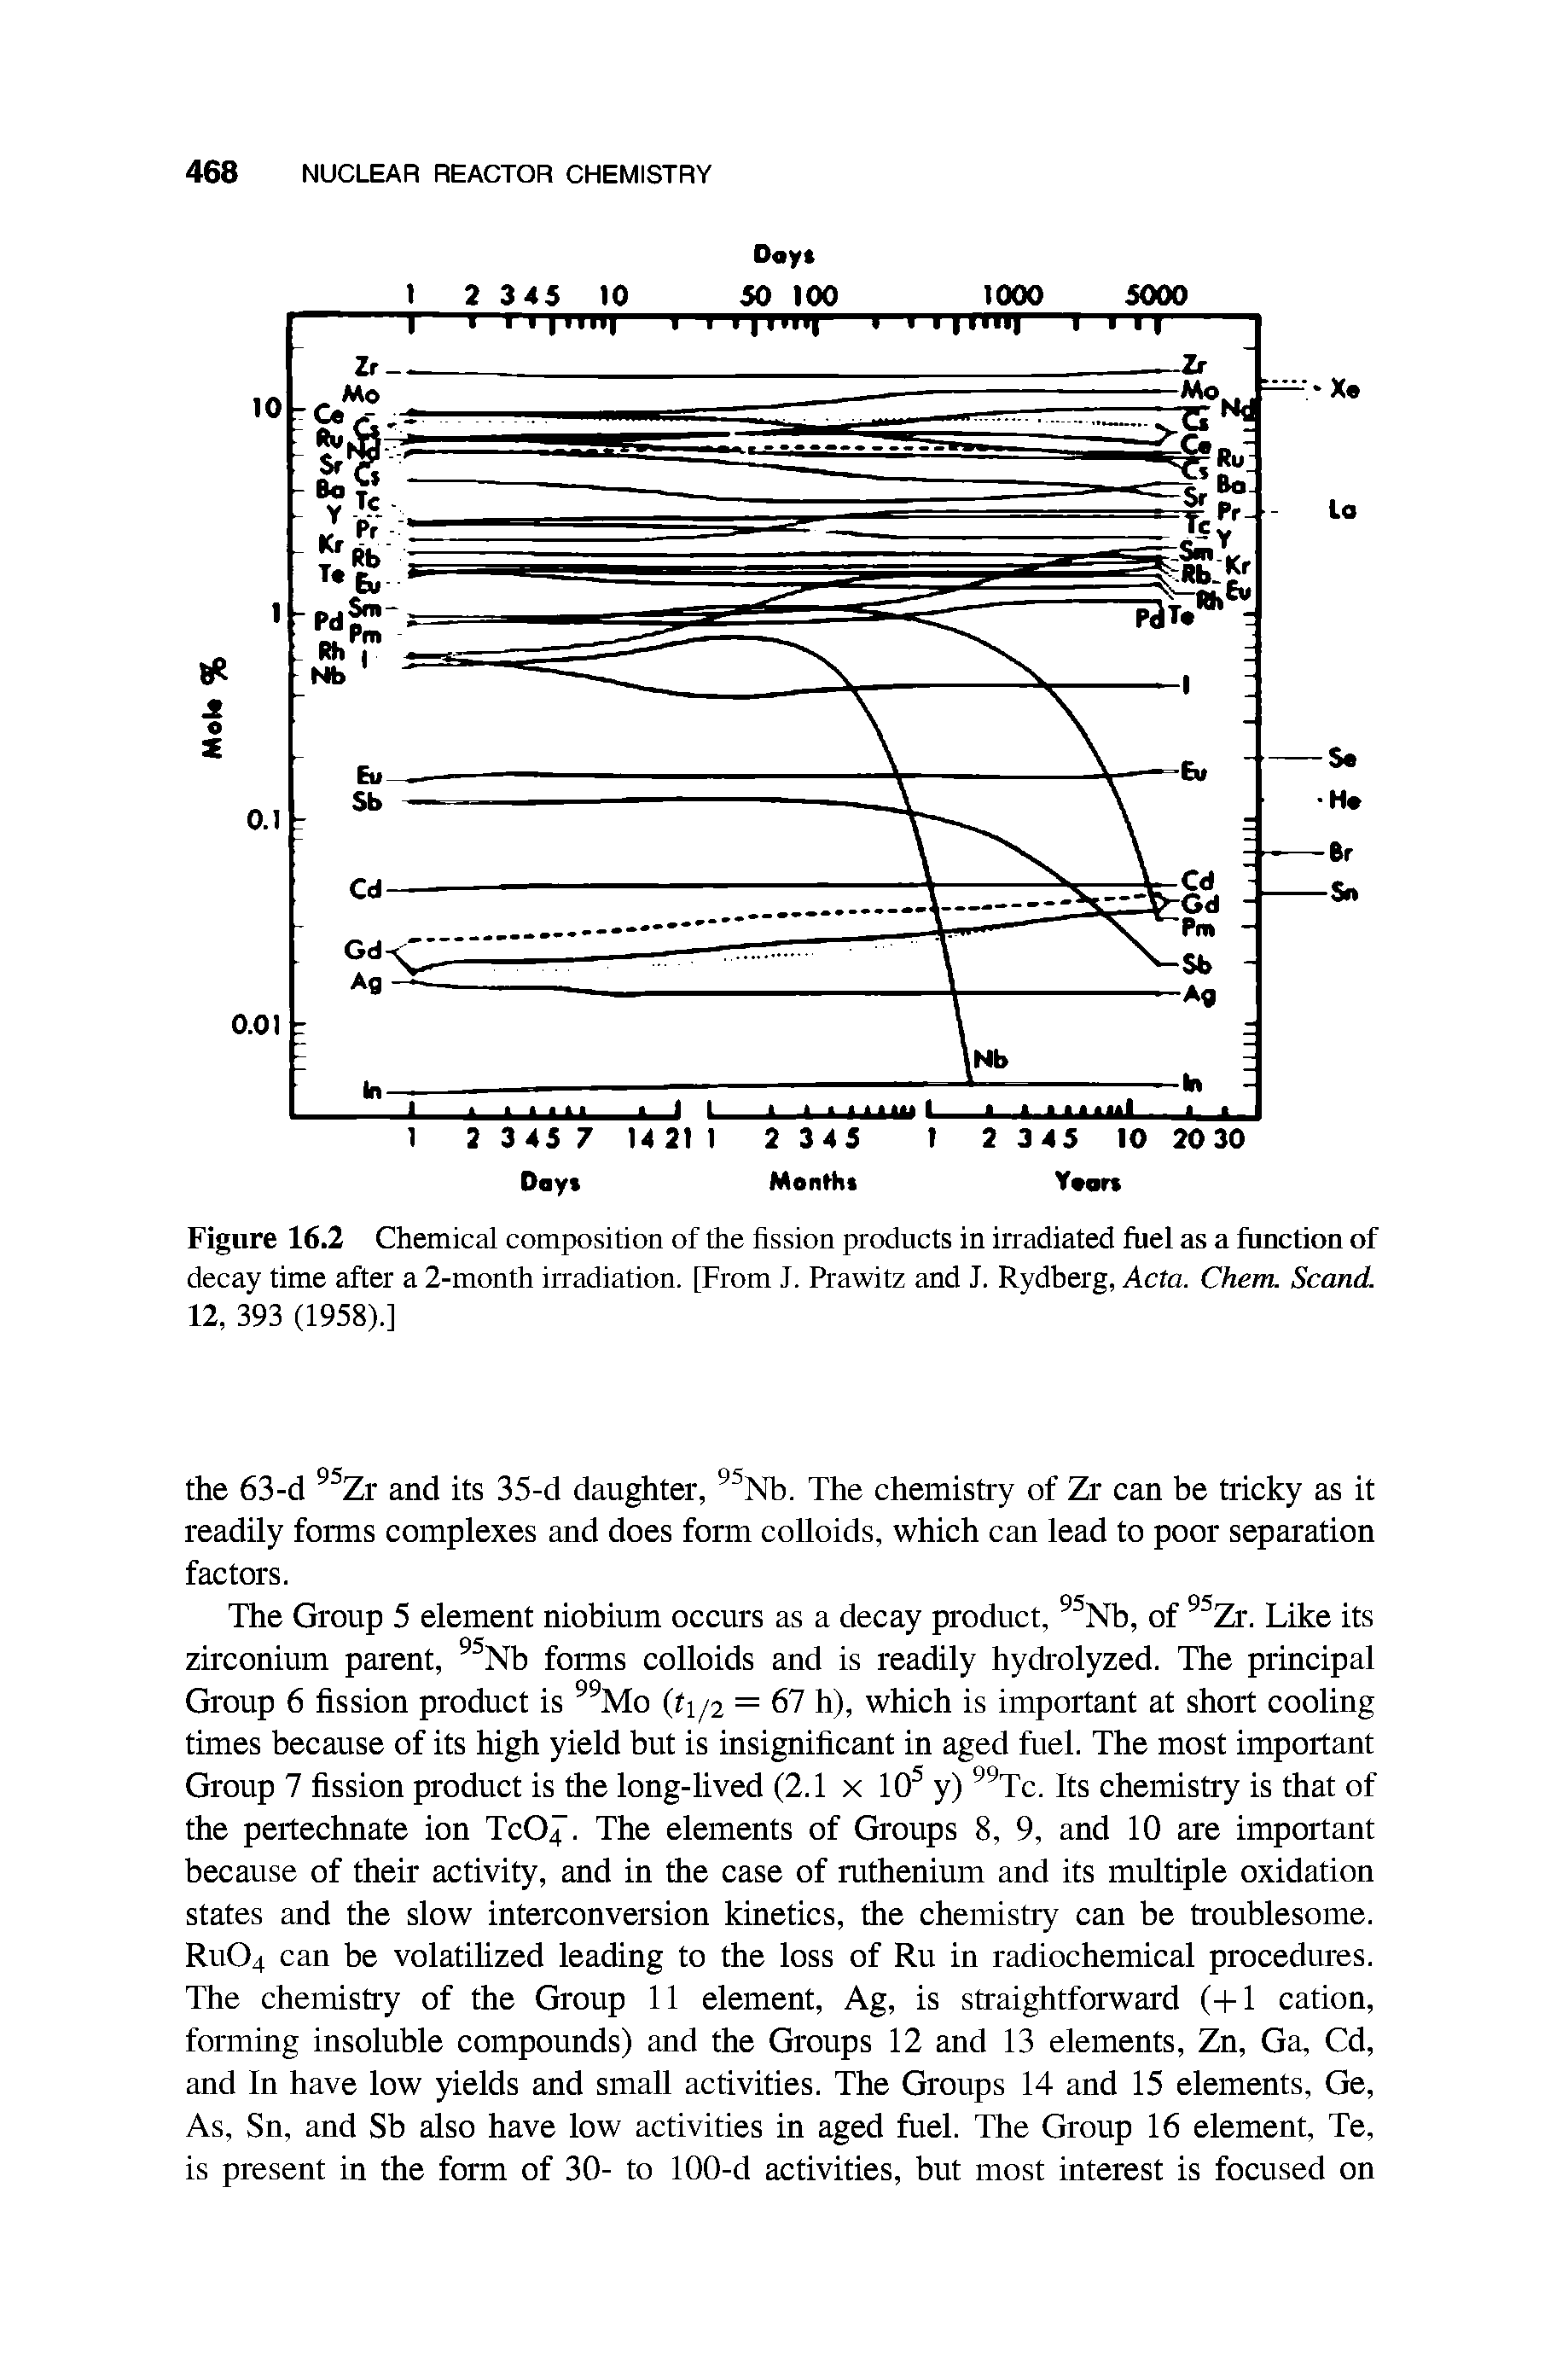 Figure 16.2 Chemical composition of the fission products in irradiated fuel as a function of decay time after a 2-month irradiation. [From J. Prawitz and J. Rydberg, Acta. Chem. ScantL 12, 393 (1958).]...